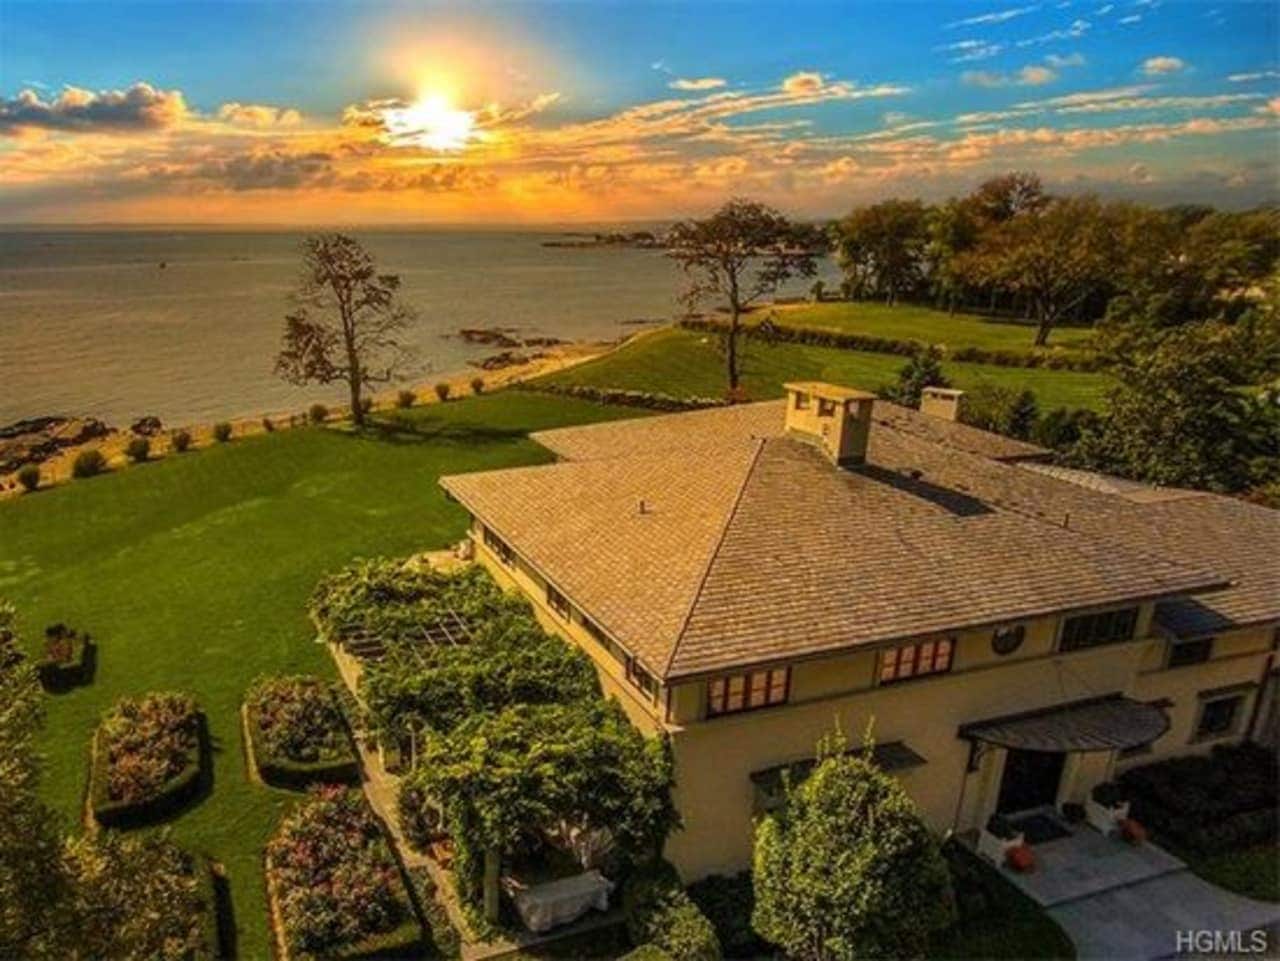 This five-bedroom manse on Parsonage Point in Rye sold last year for $21 million plus. The city recently came out on top in a real estate website's survey of the most expensive zip codes outside New York City.